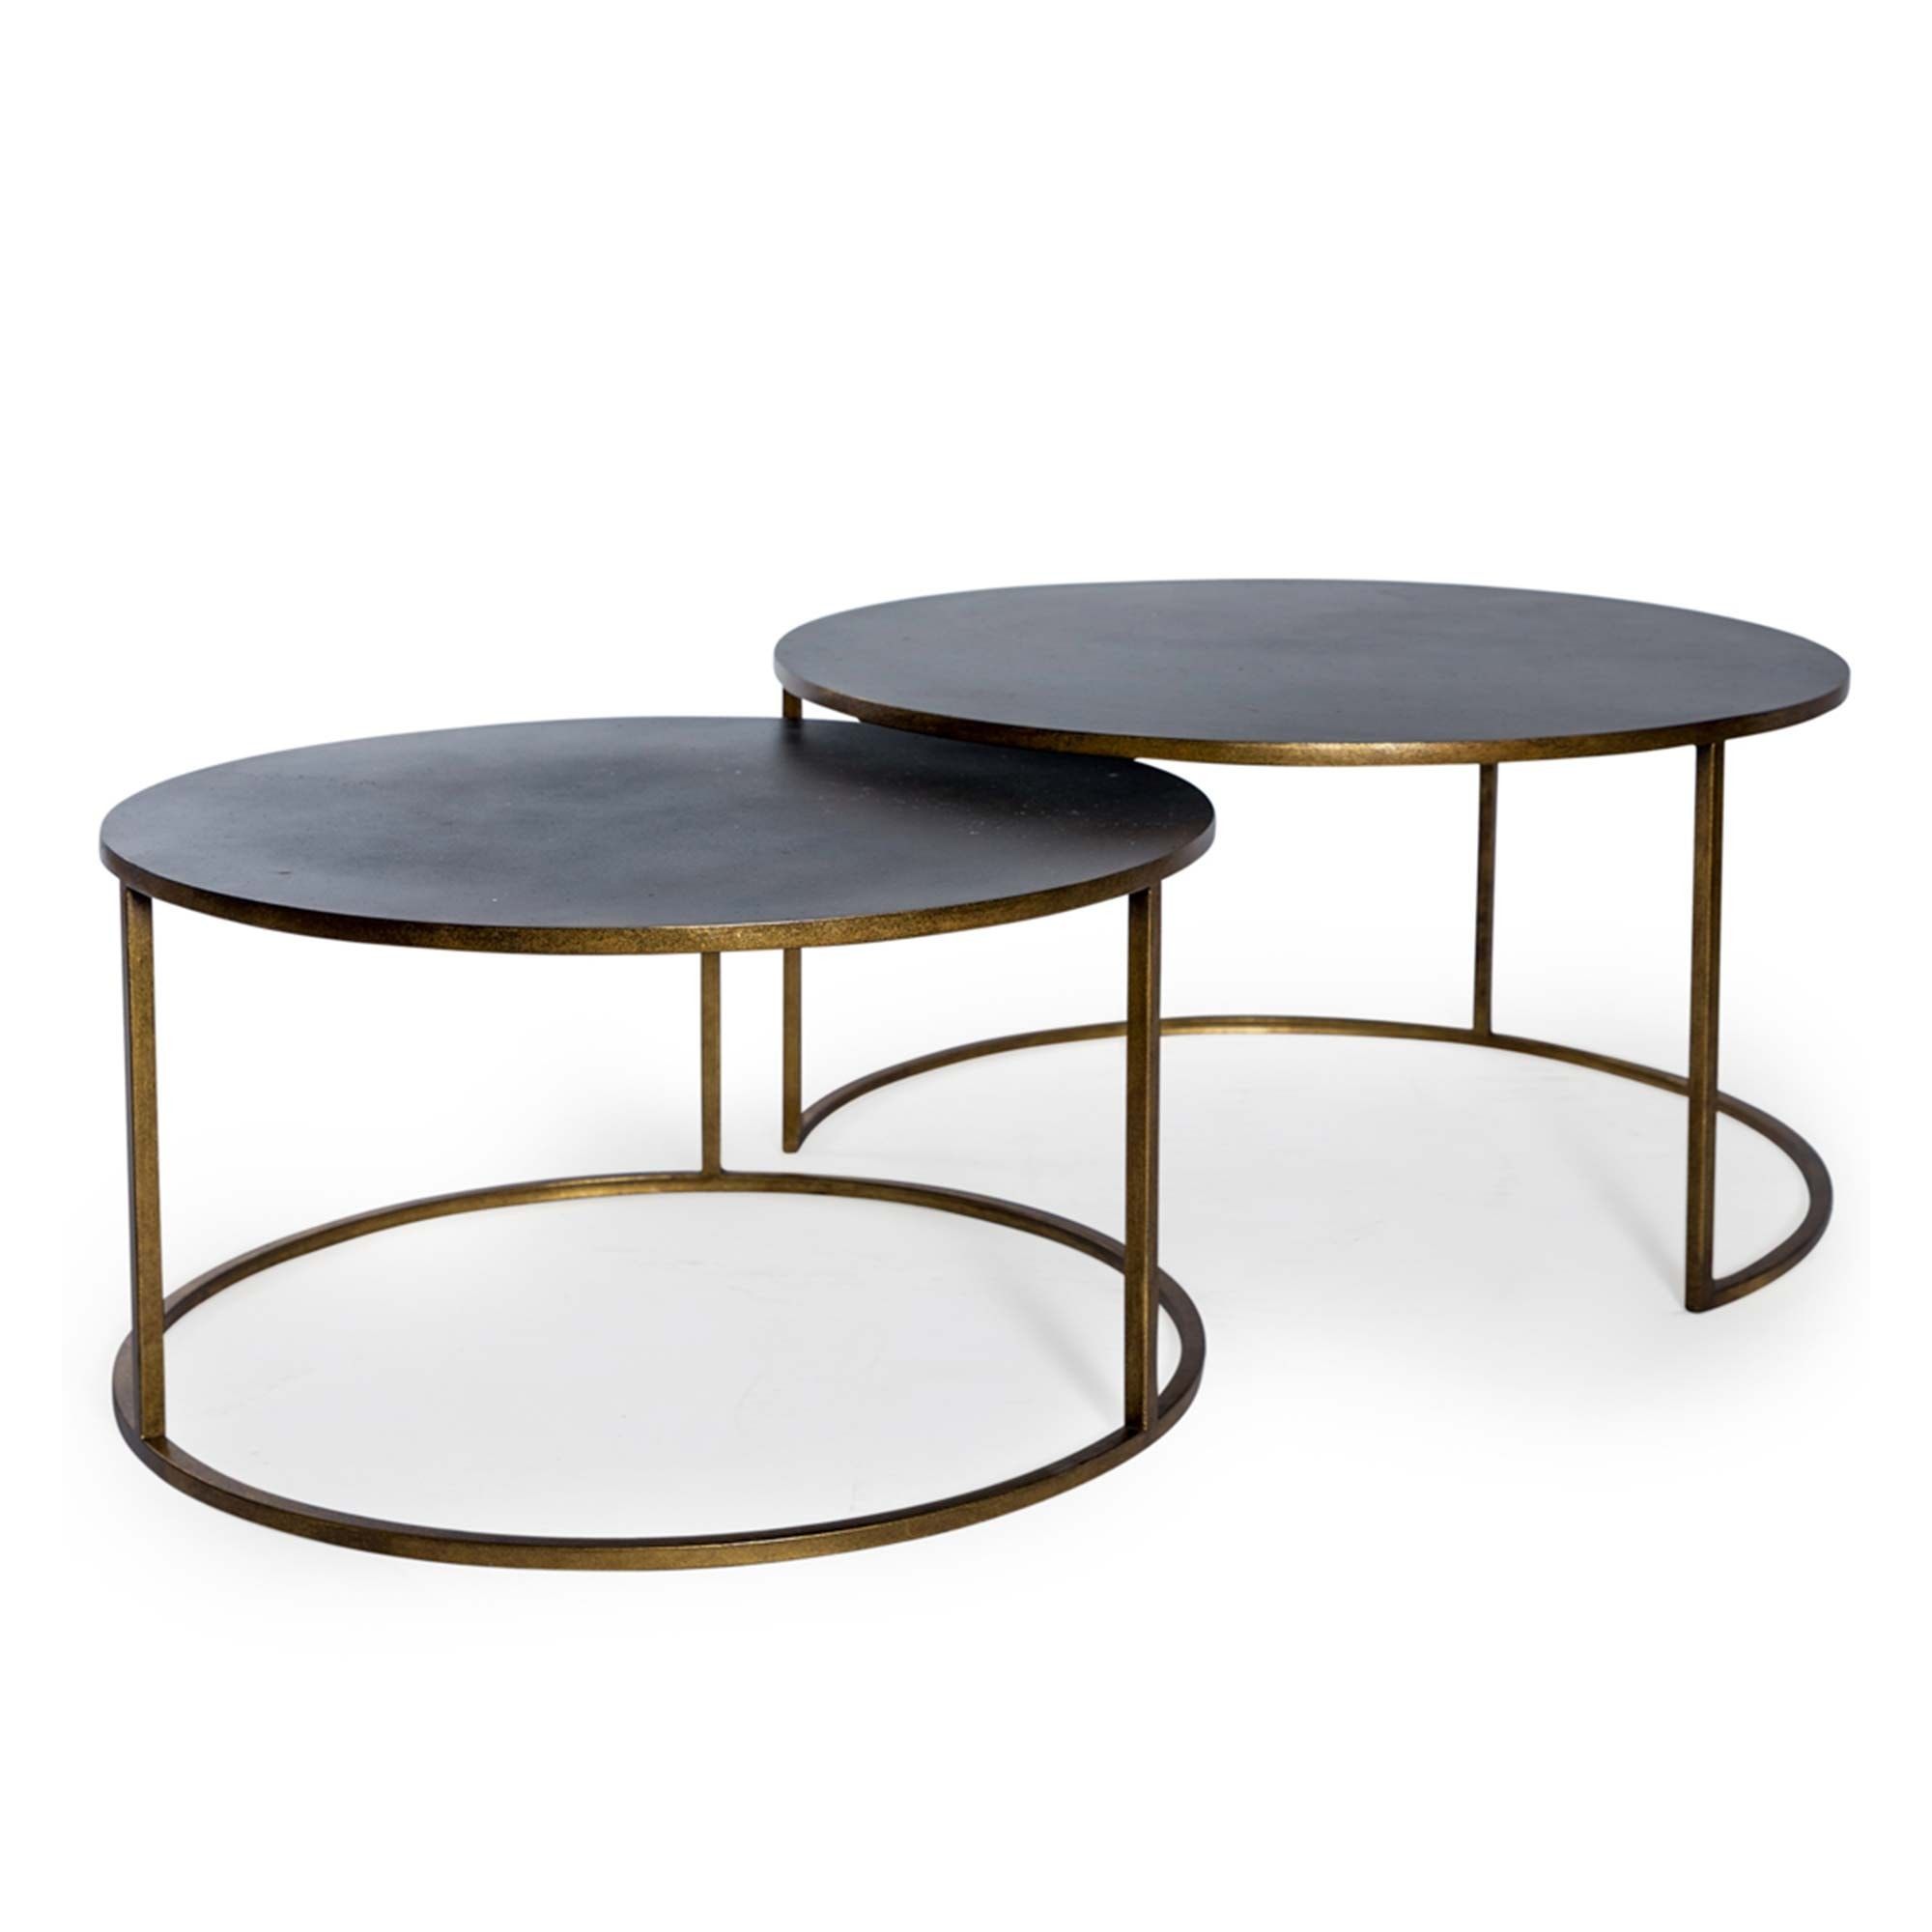 Nest Of 2 Antique Gold And Bronze Metal Coffee Tables | Nest Of Tables In Regency Cain Steel Coffee Tables (View 14 of 15)